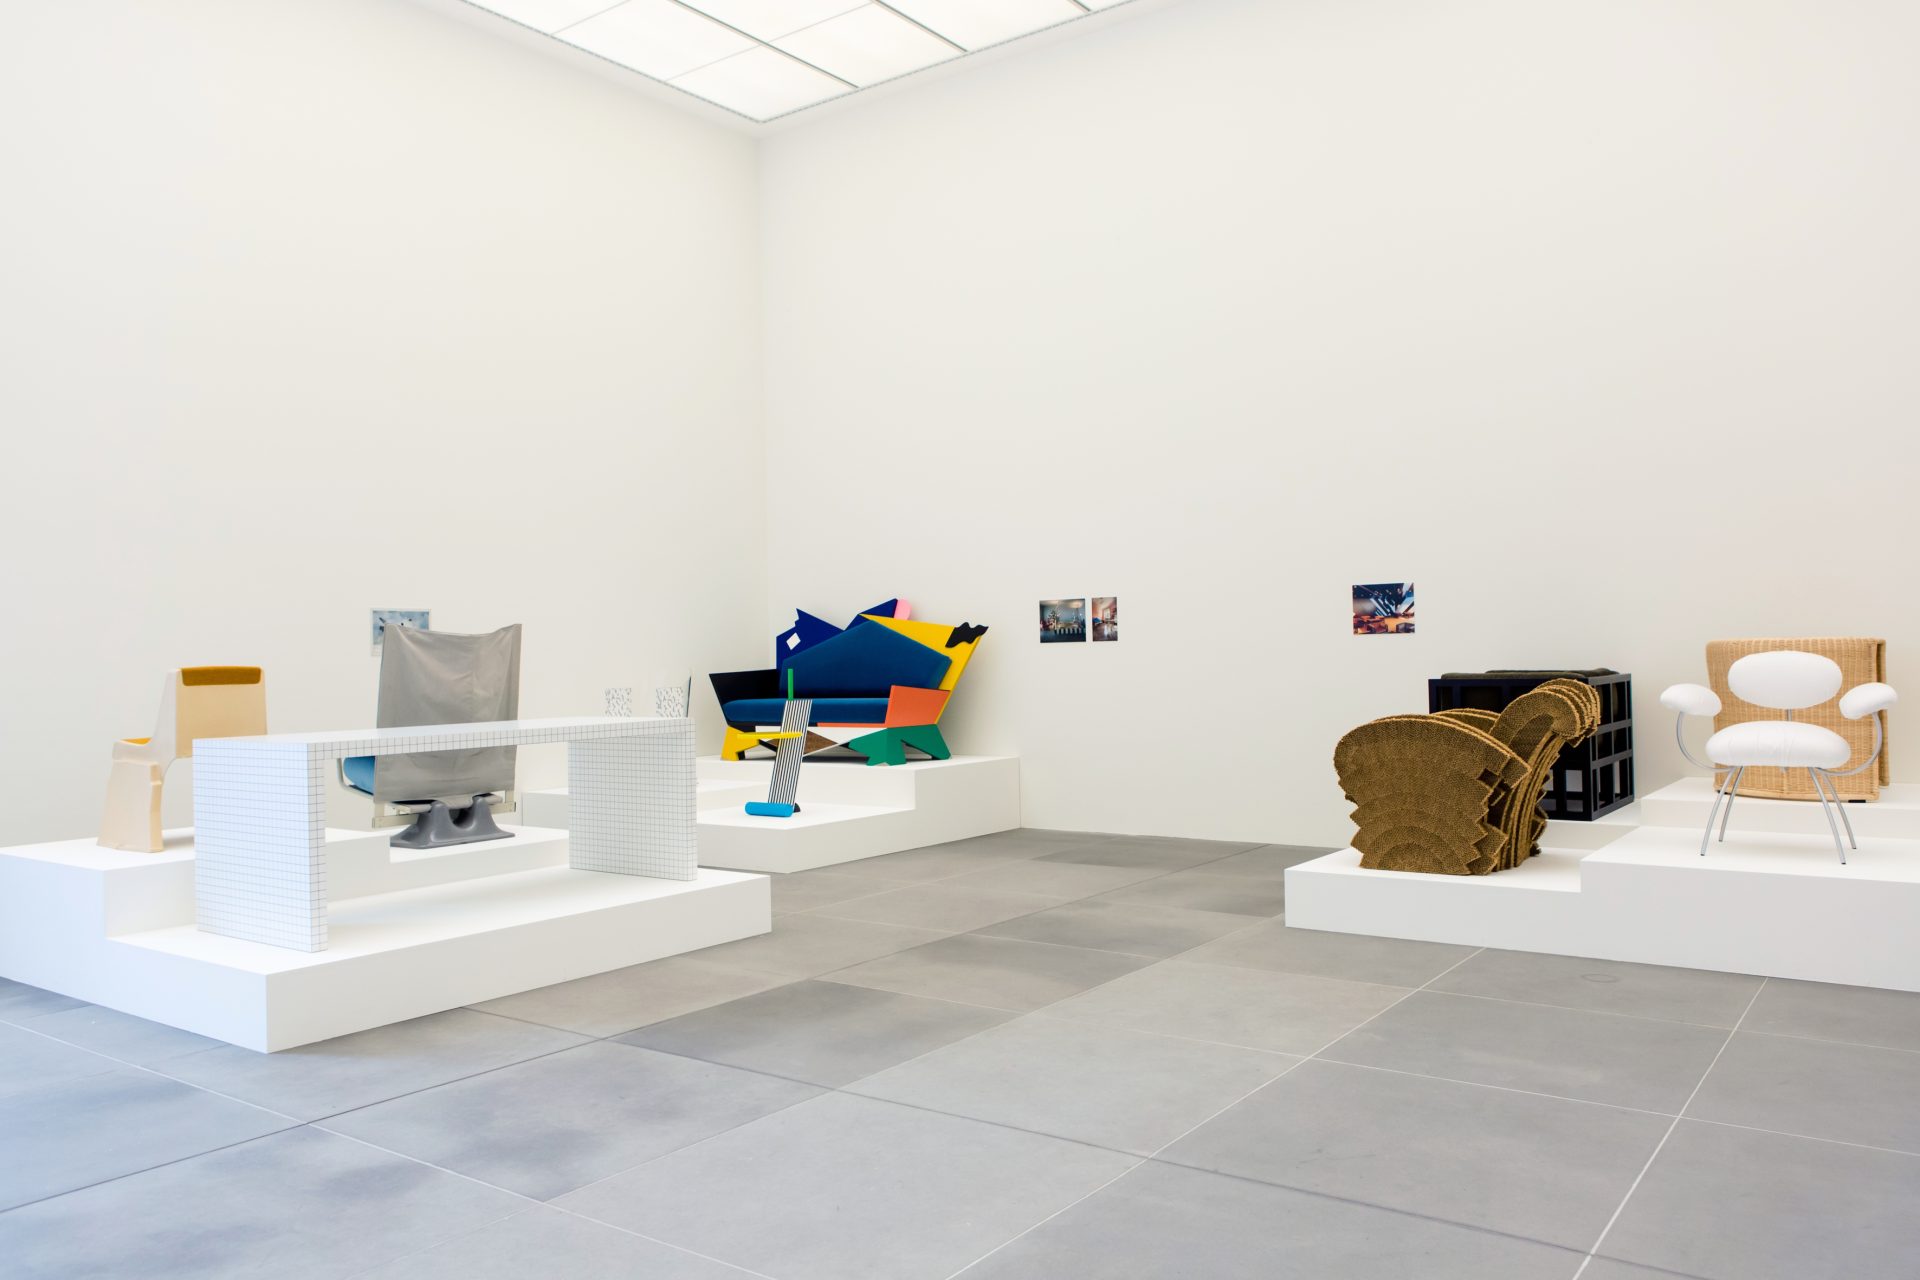 View of the presentation with pieces of furniture, front left, u-shaped table, right Frank O. Gehry, Little Beaver armchair, cut from cardboard in 1980.